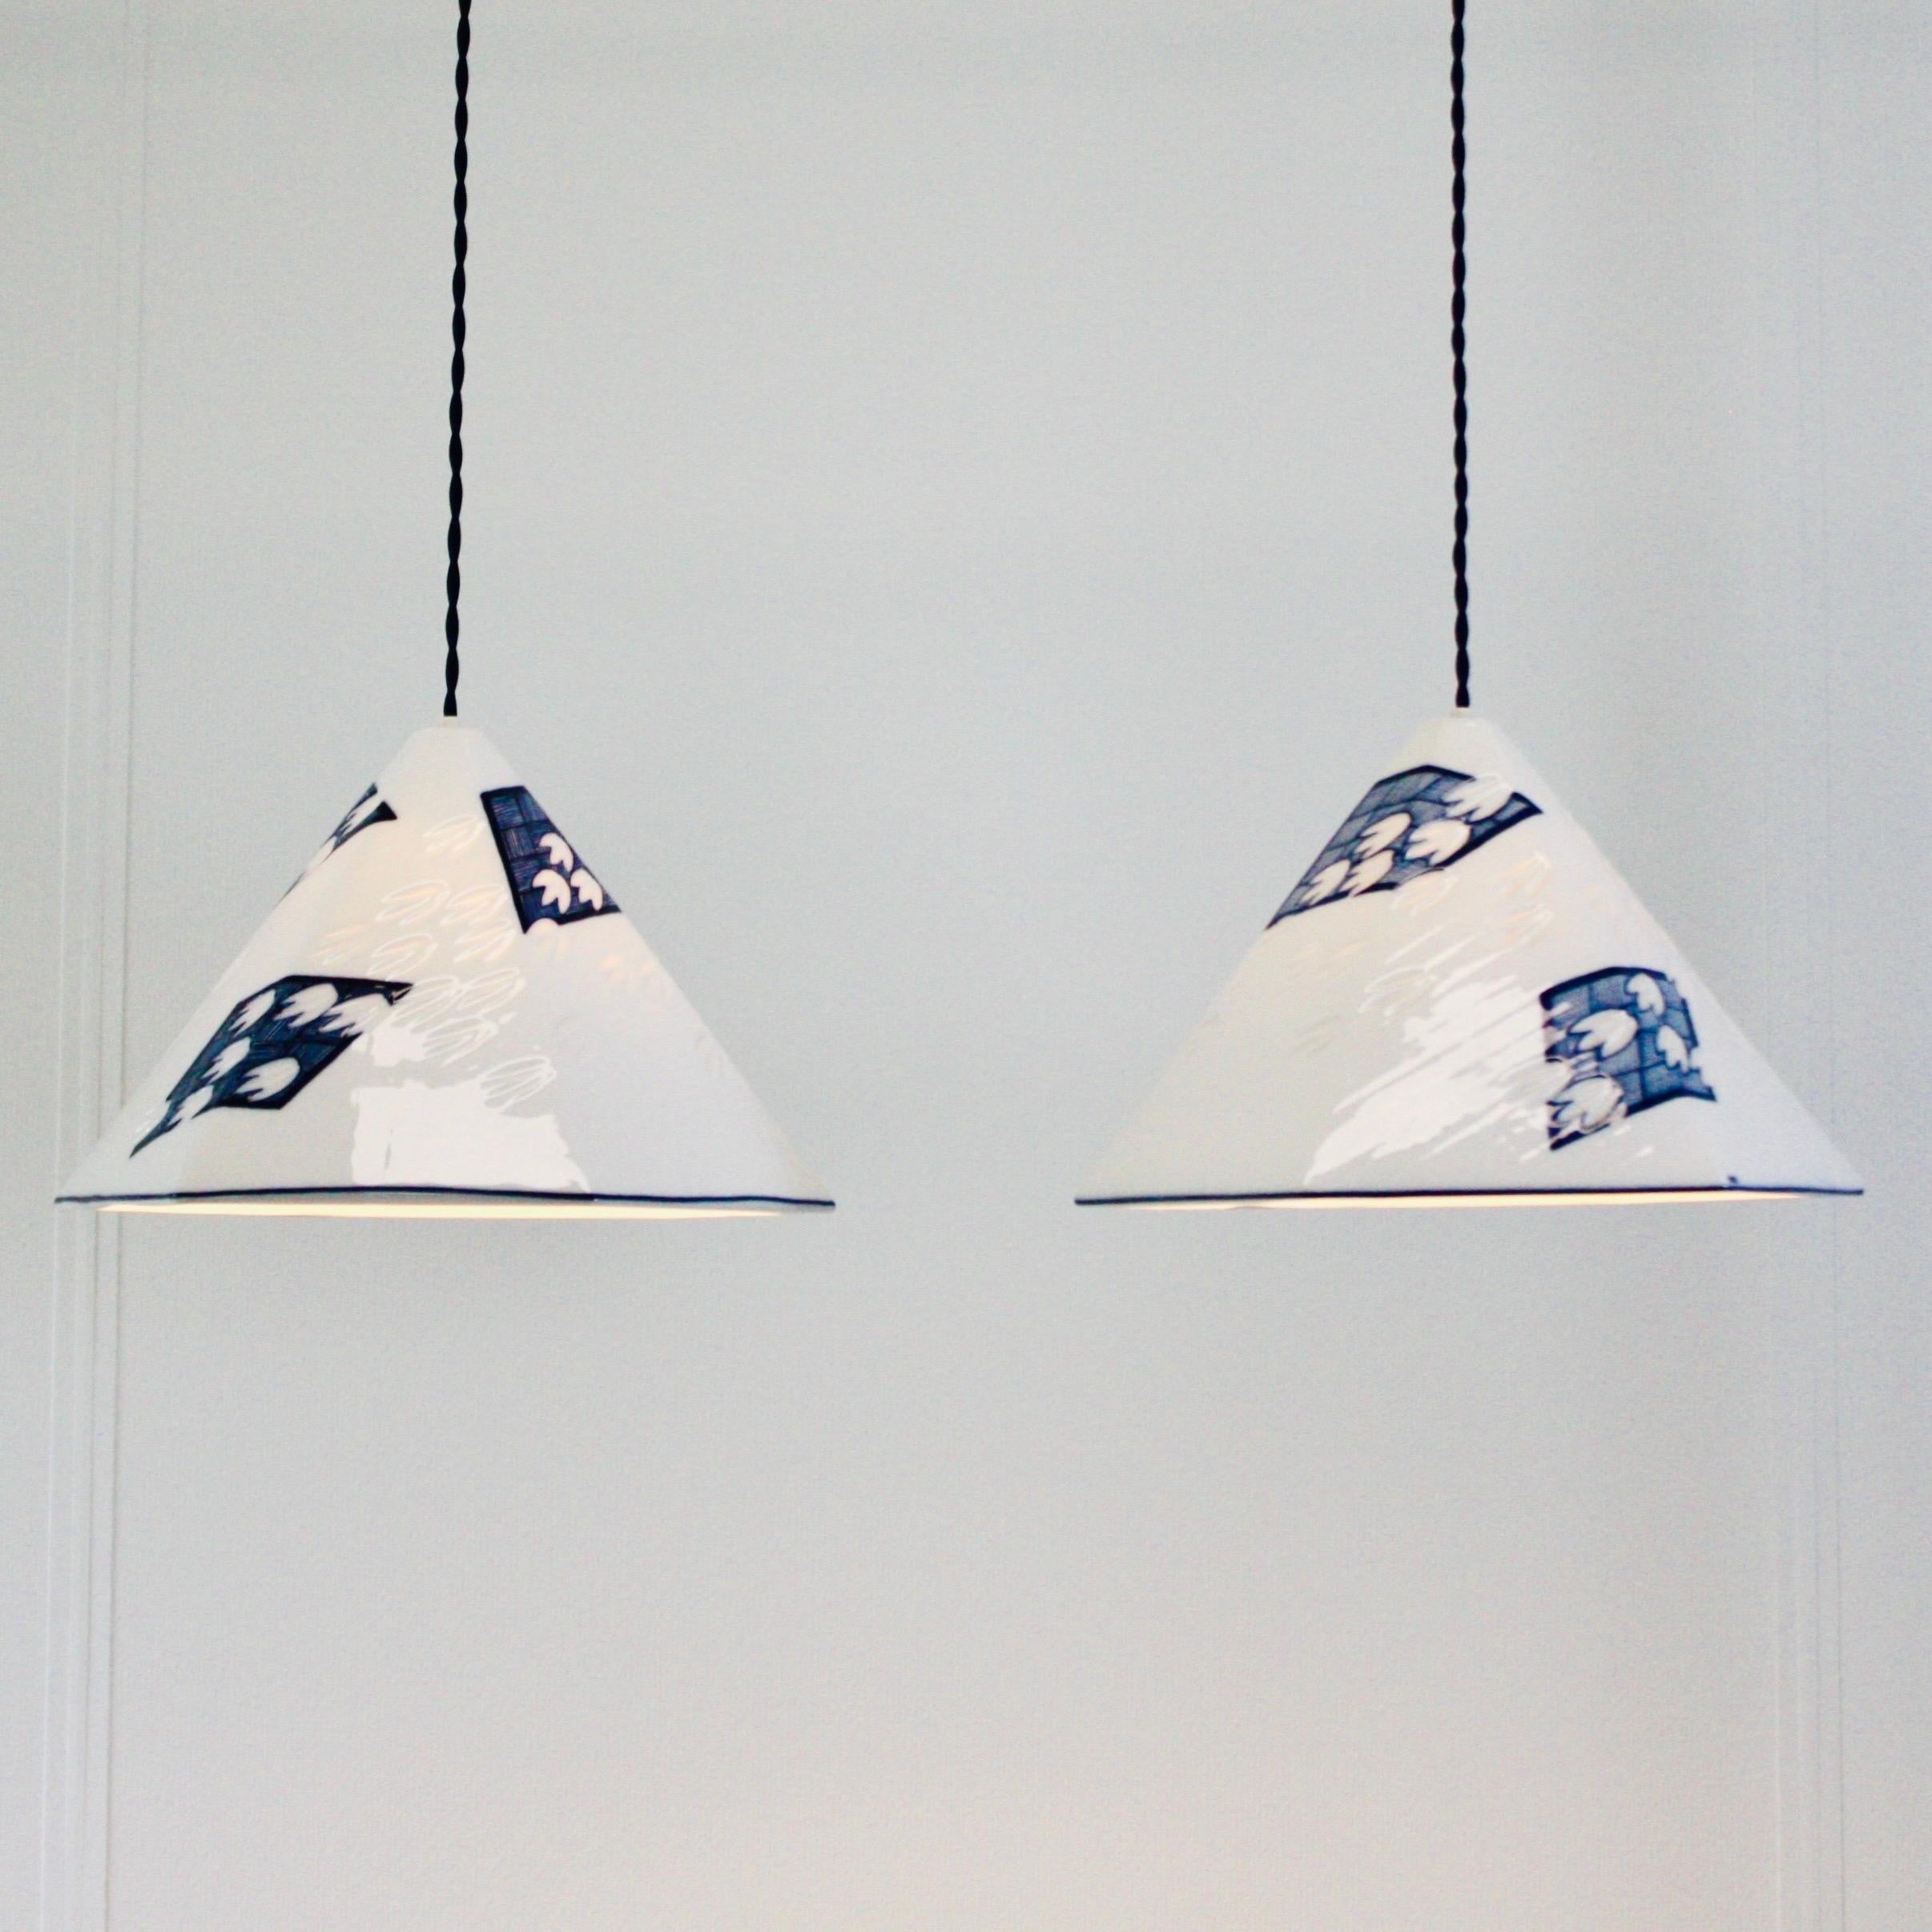 A set of Royal Copenhagen porcelain pendant lights by Anne Marie Trolle. The set is in excellent condition and presents a reinterpretation of the classic Royal Copenhagen art work. 

* A set of white 6-sided porcelain pendant lights with dark blue